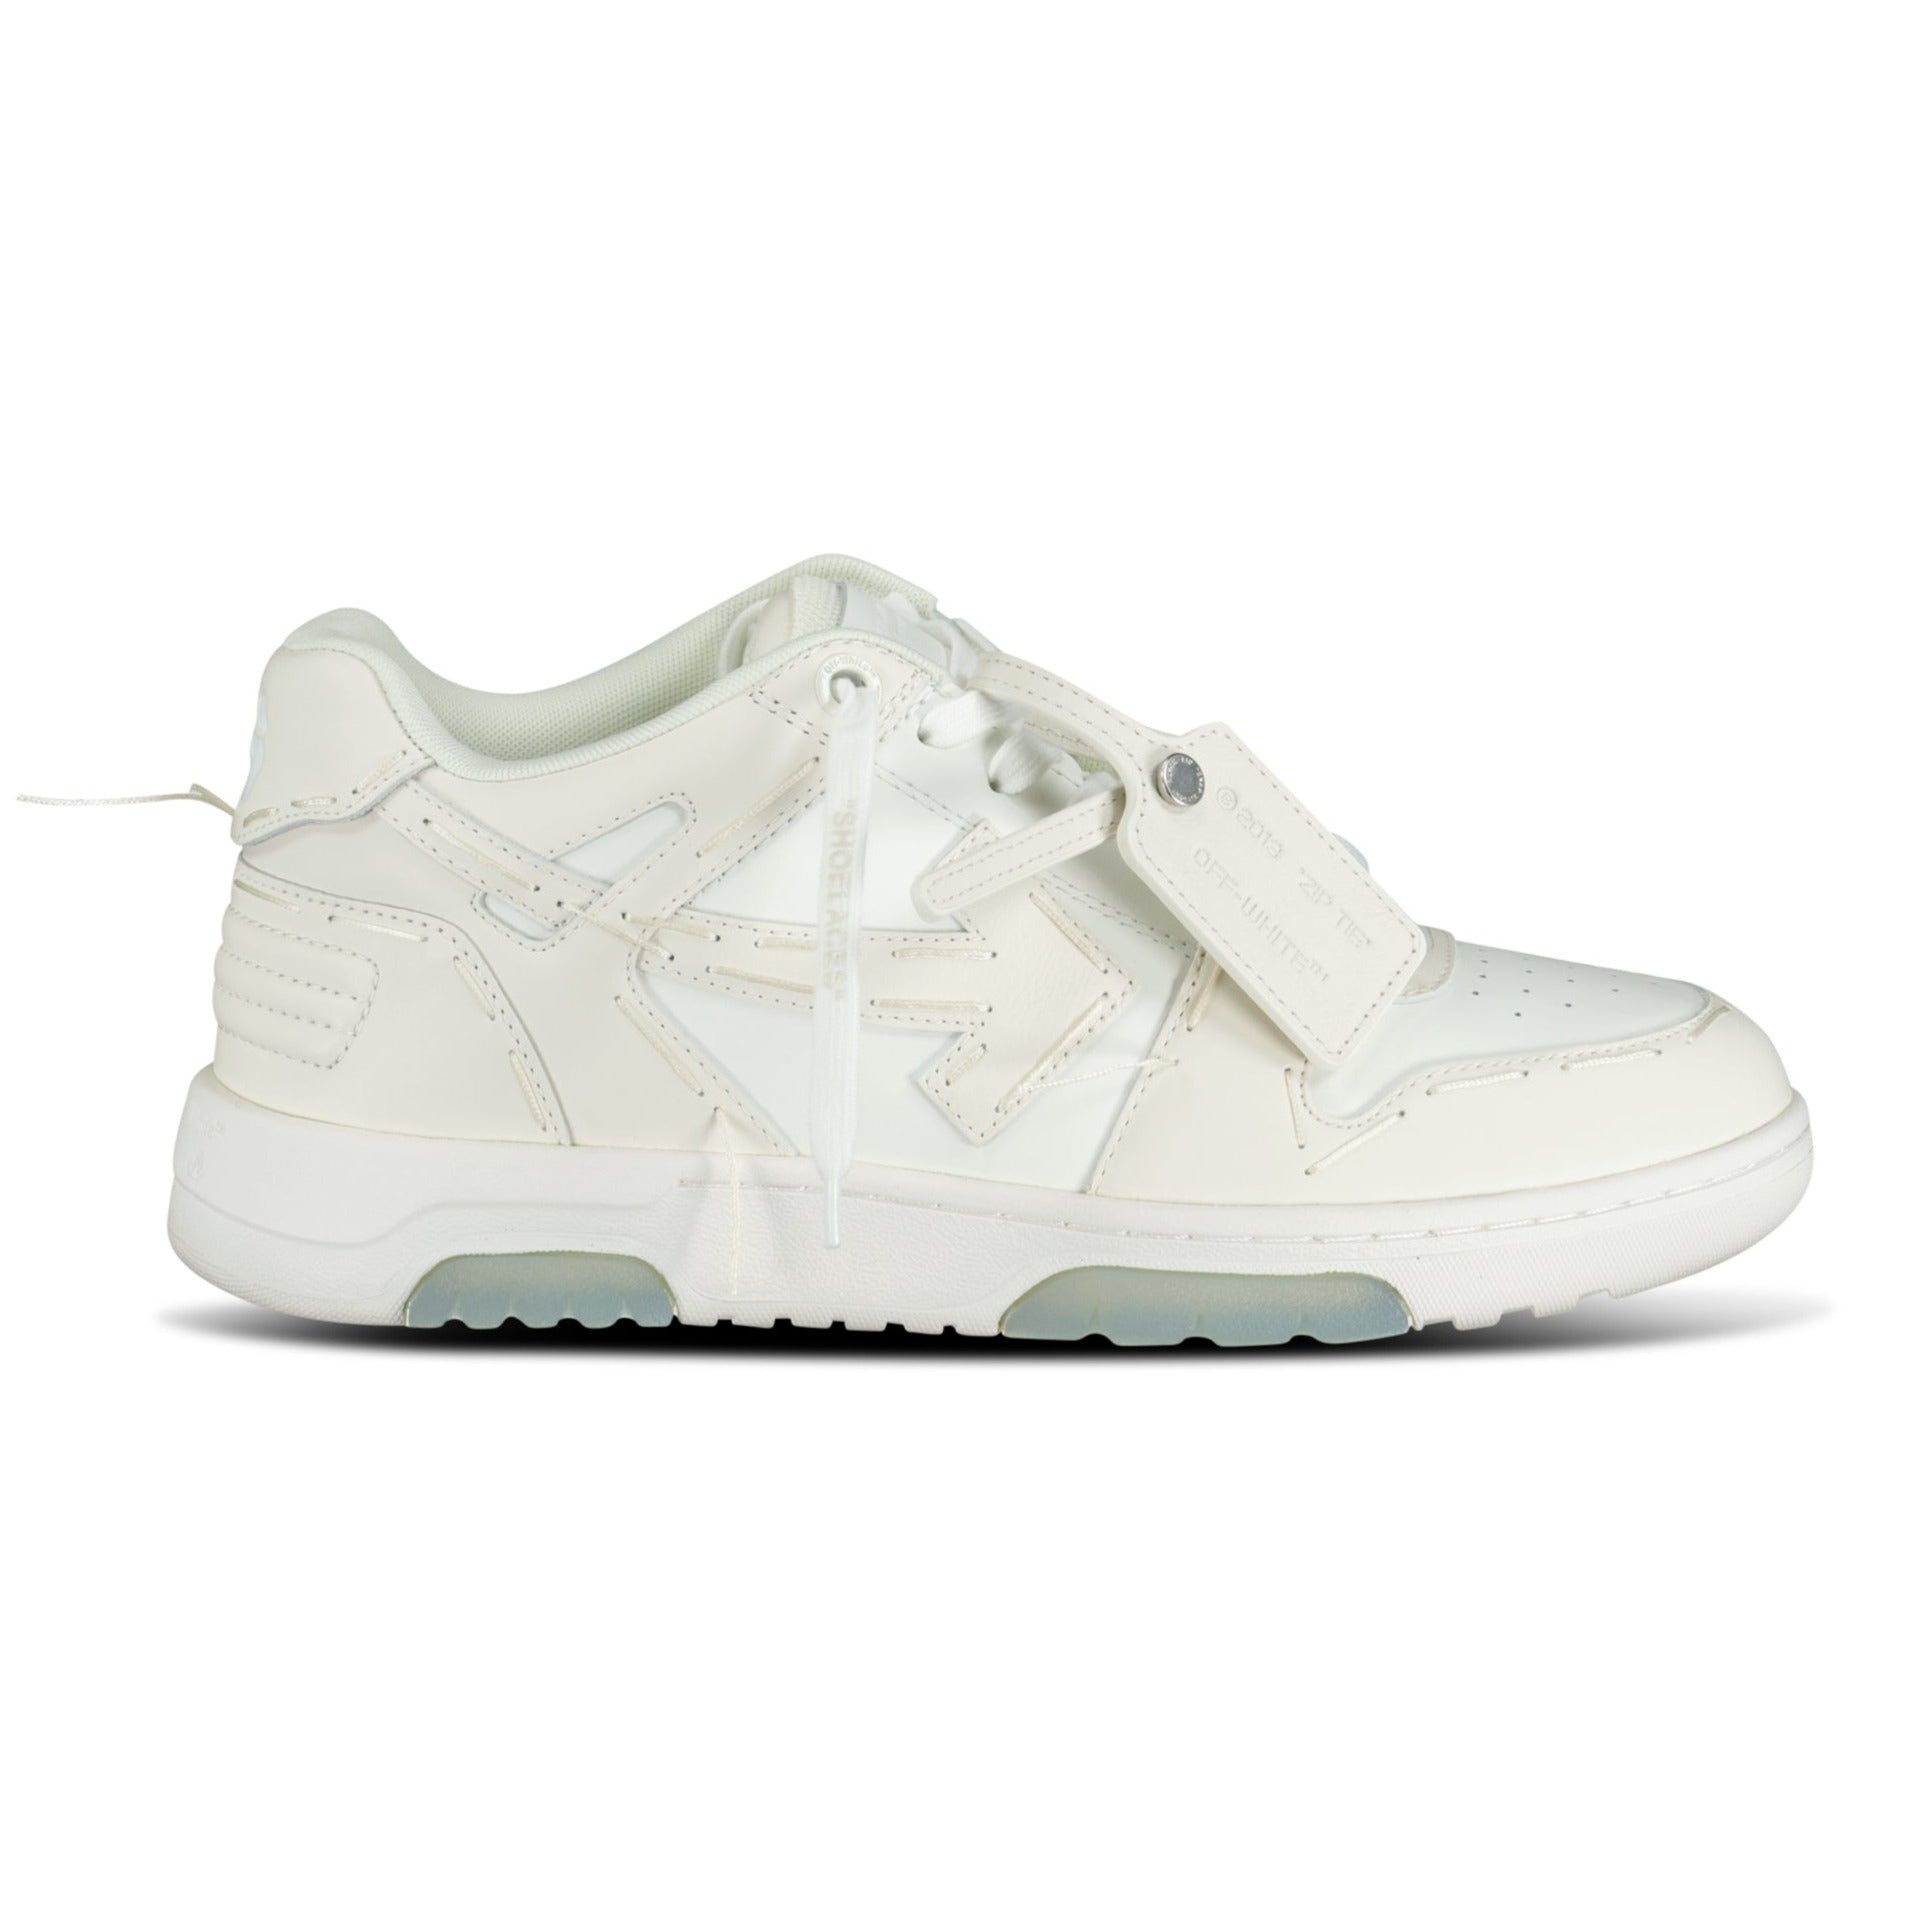 OFF-WHITE Out Of Office Sartorial Stitching in White/ Coconut